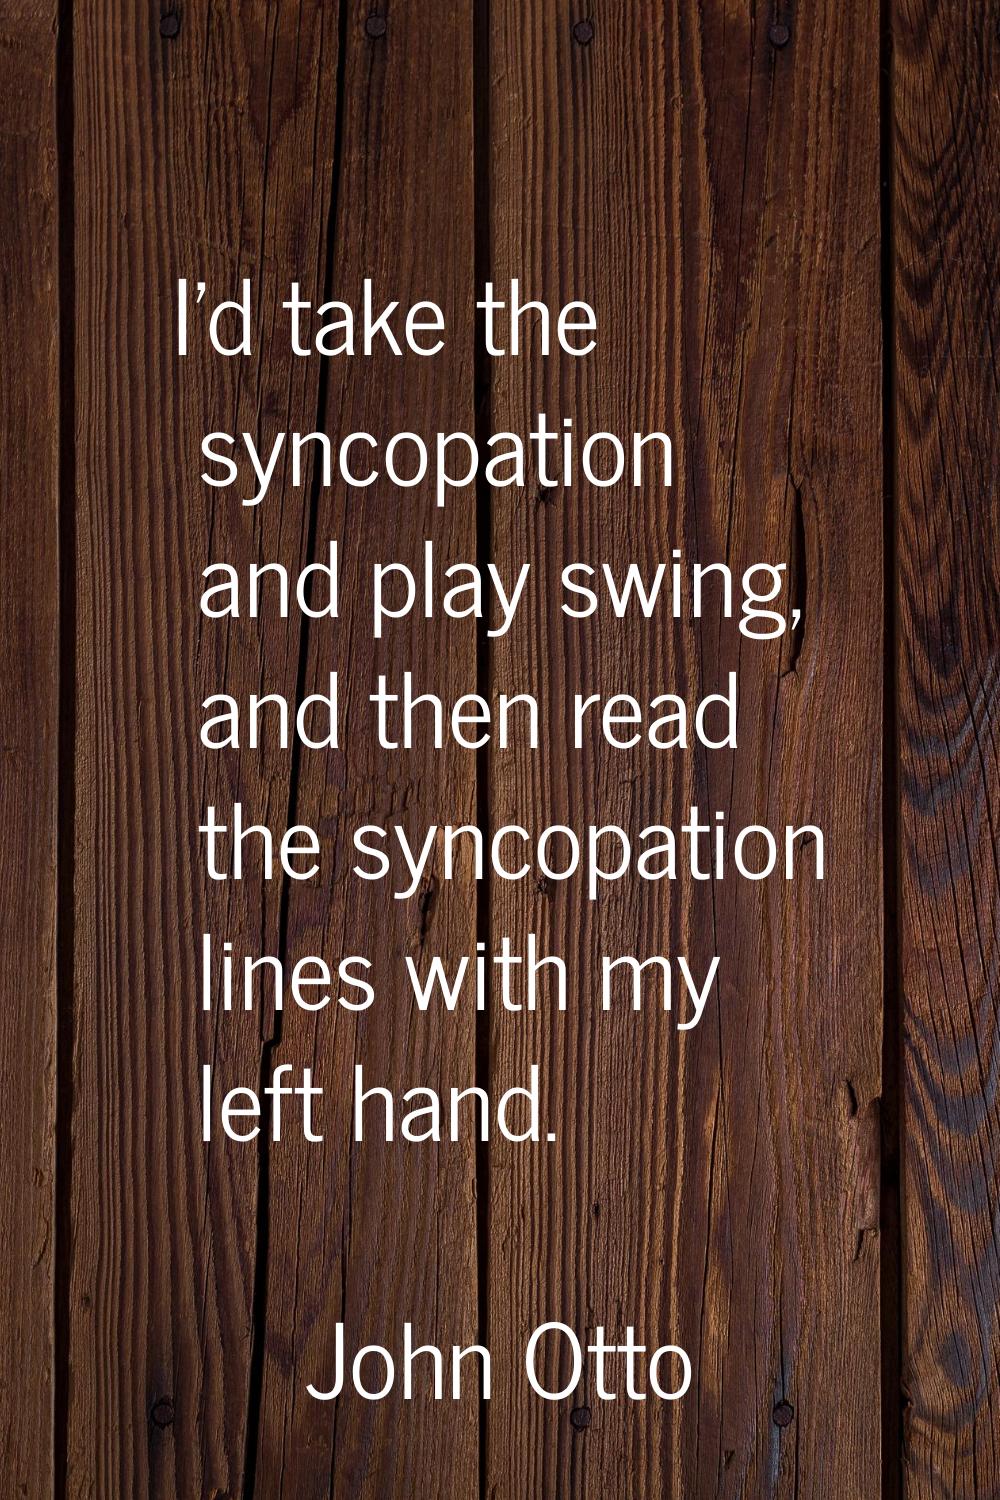 I'd take the syncopation and play swing, and then read the syncopation lines with my left hand.